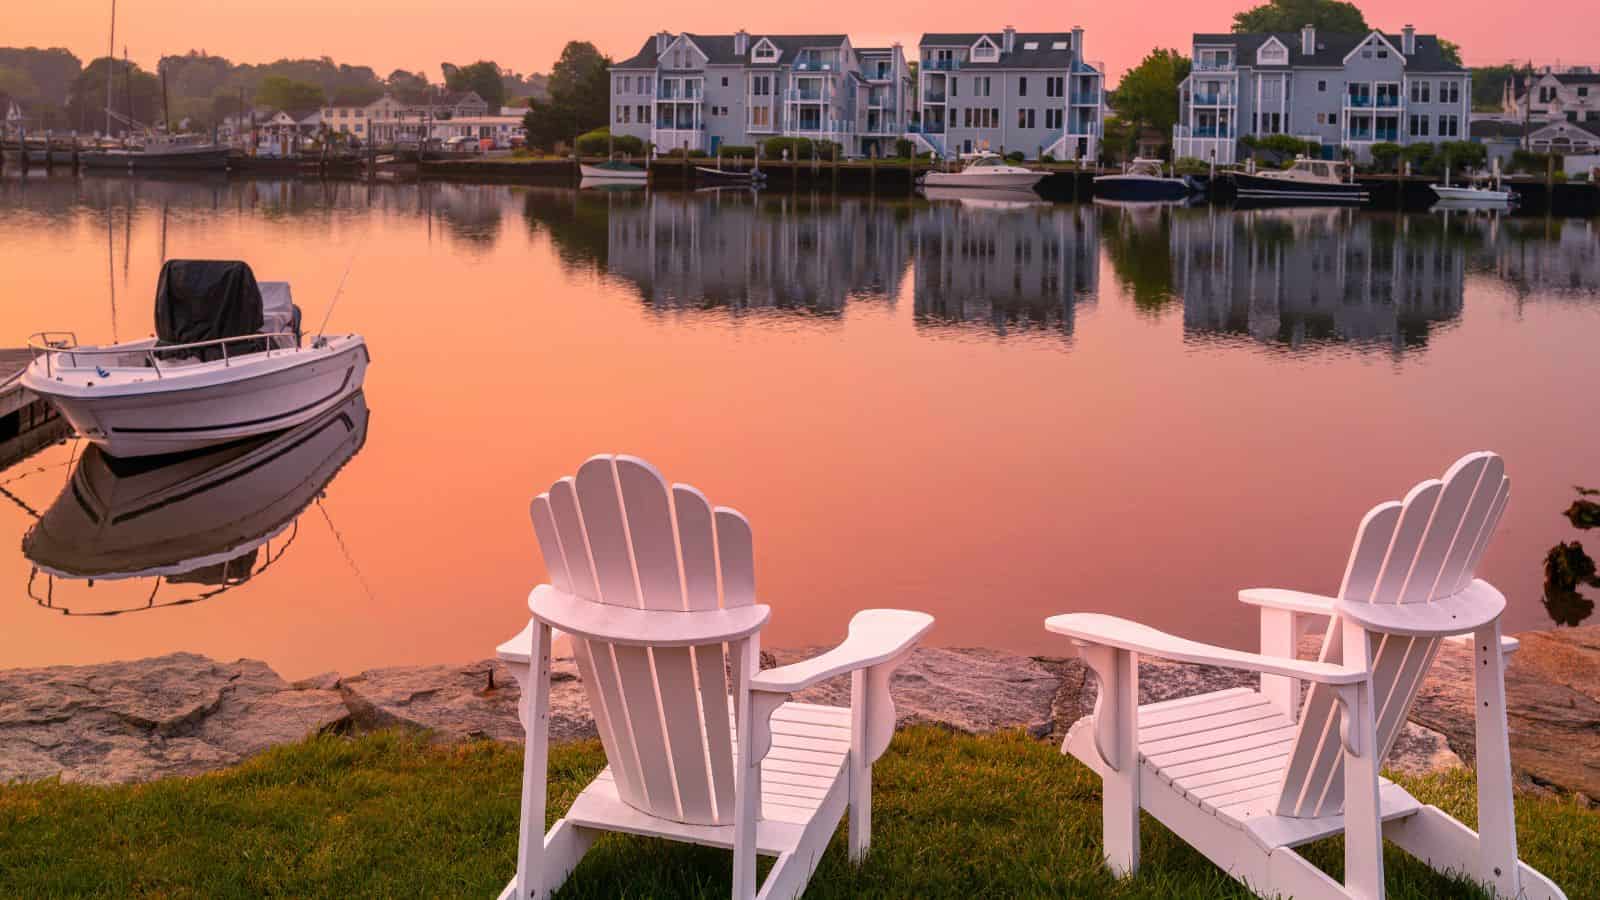 <p>You probably remember Mystic, Connecticut from Julia Roberts’ 1988 flick, <em>Mystic Pizza</em>. Over 35 years later, the blissful spirit of the village is still alive and well—though it may attract a few more tourists now than it did before.</p><p>Book yourself into a seaside resort and take your time exploring the town’s maritime history at the Mystic Seaport Museum. After, head to Kenzie’s Fudge and Chocolate Shop for old-fashioned treats.</p>